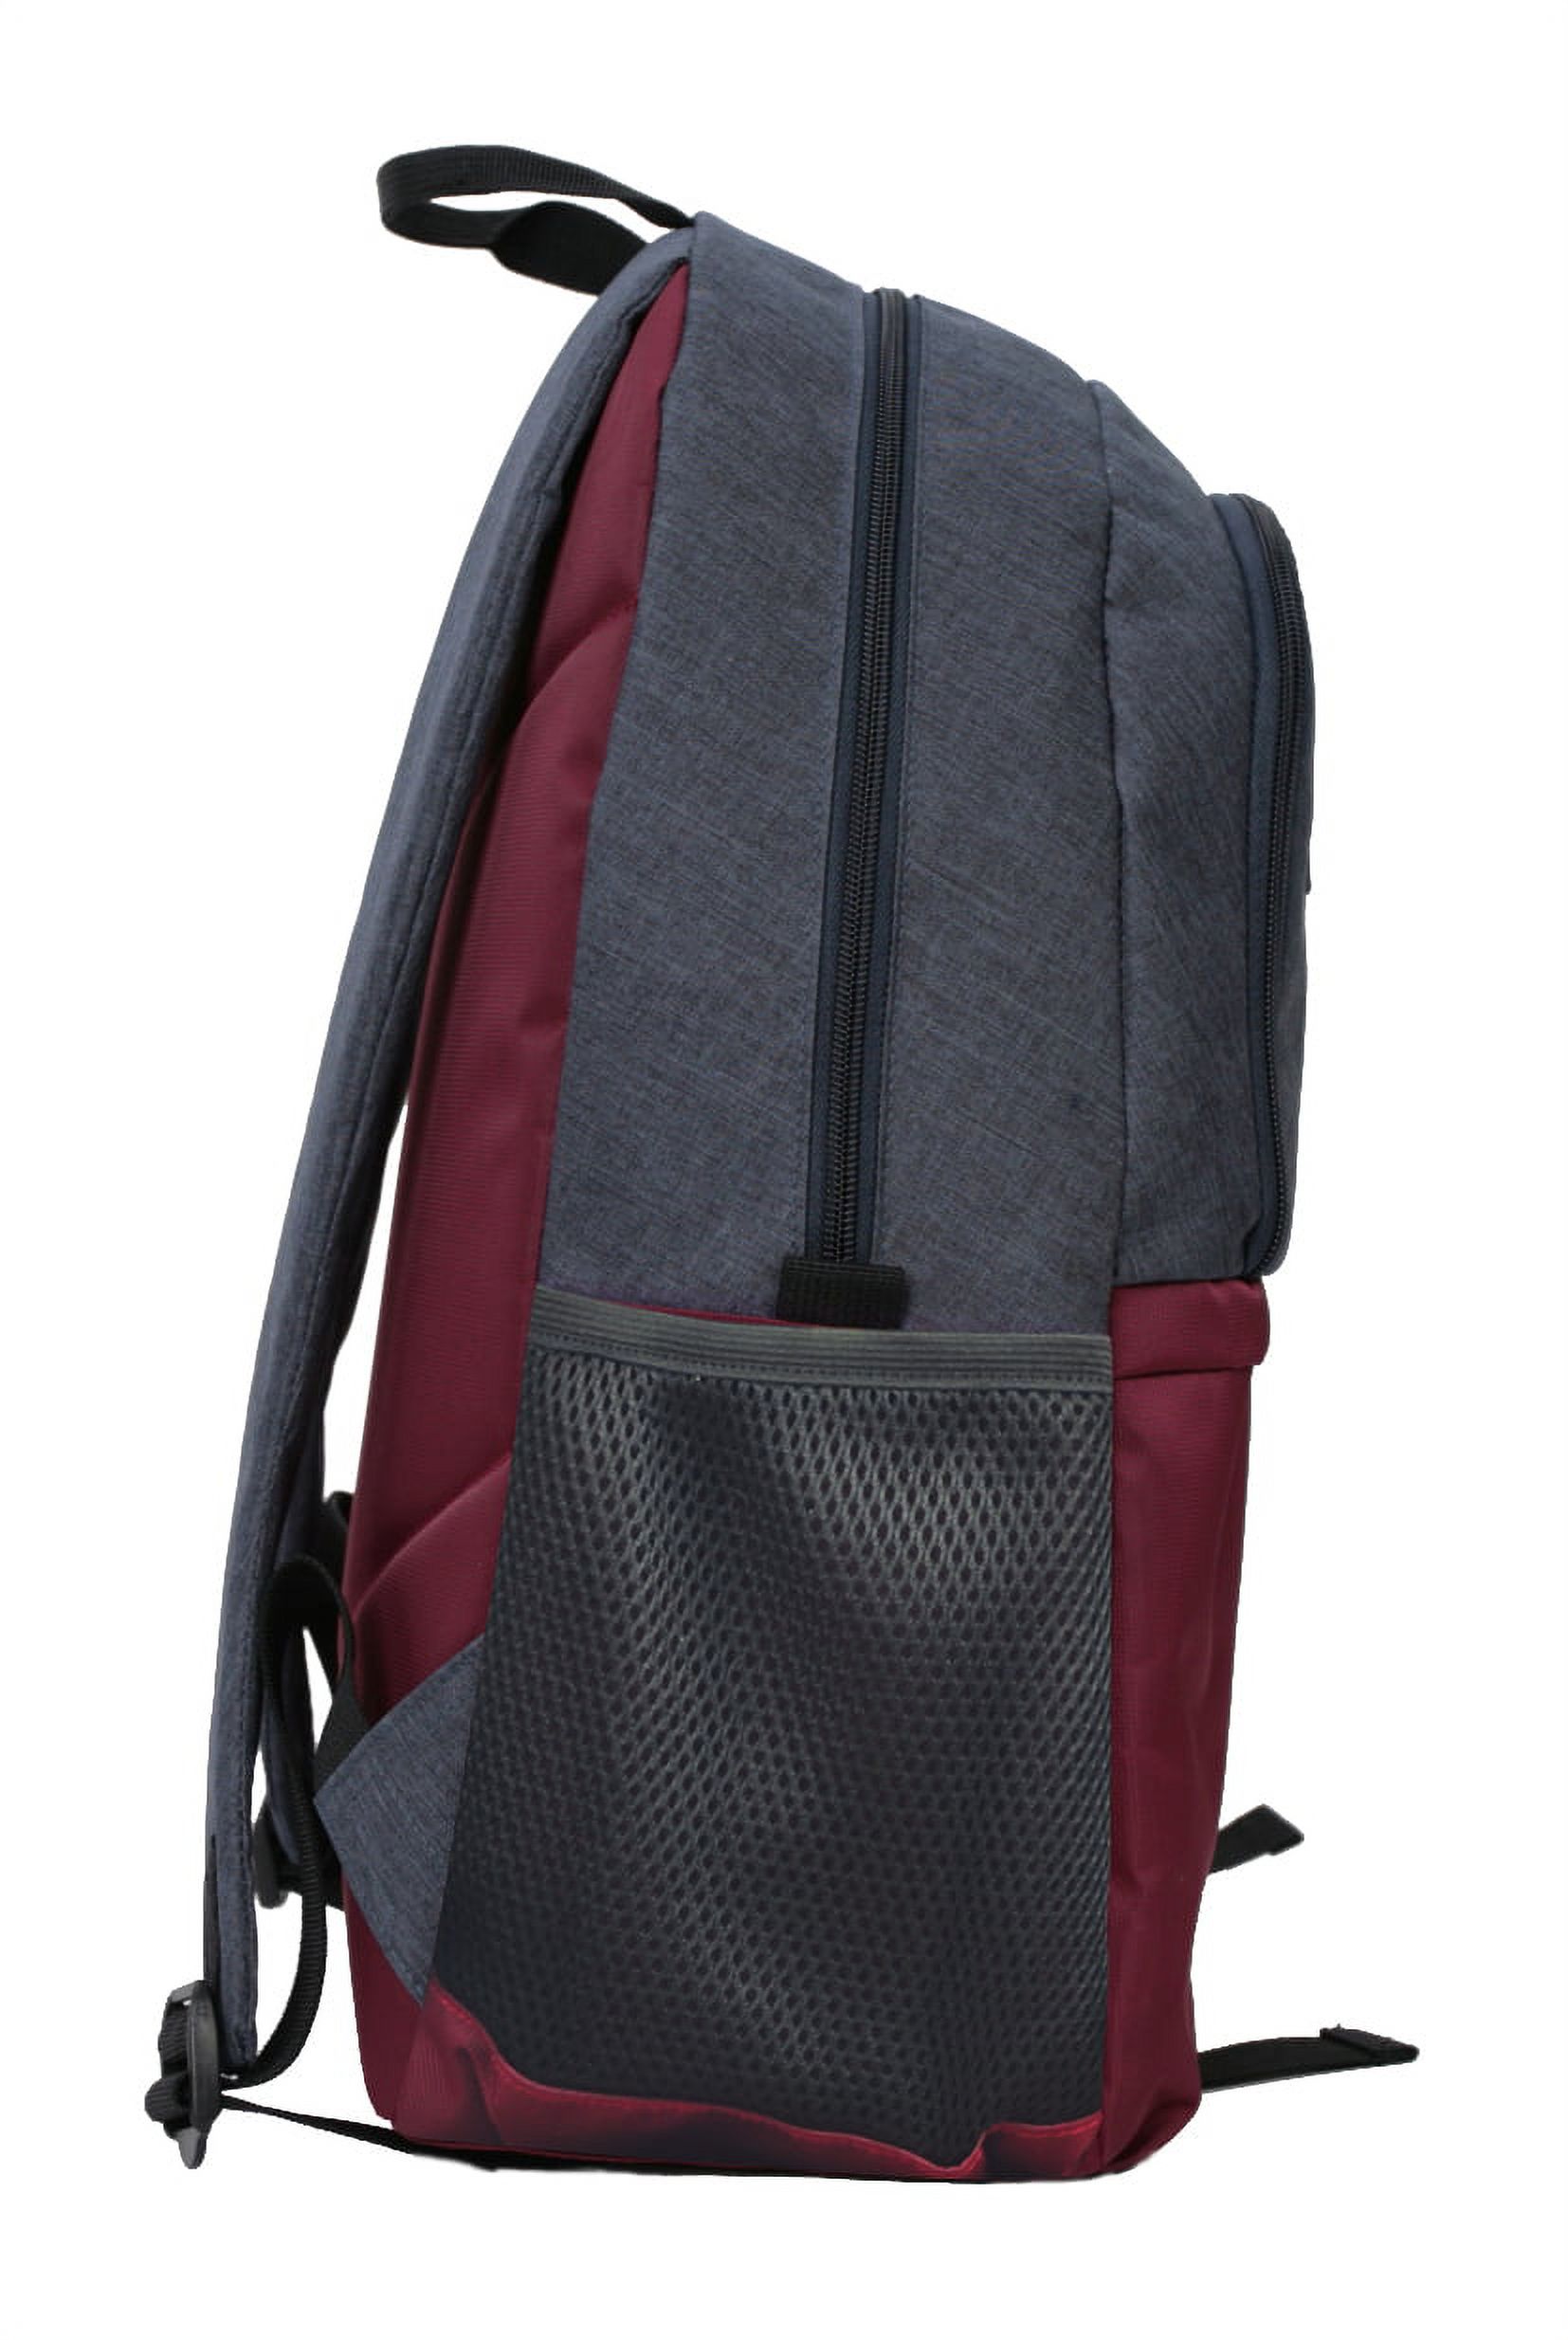 Protege 18" Heather Colorblock Adult Backpack, Navy/Maroon - Unisex - image 4 of 5